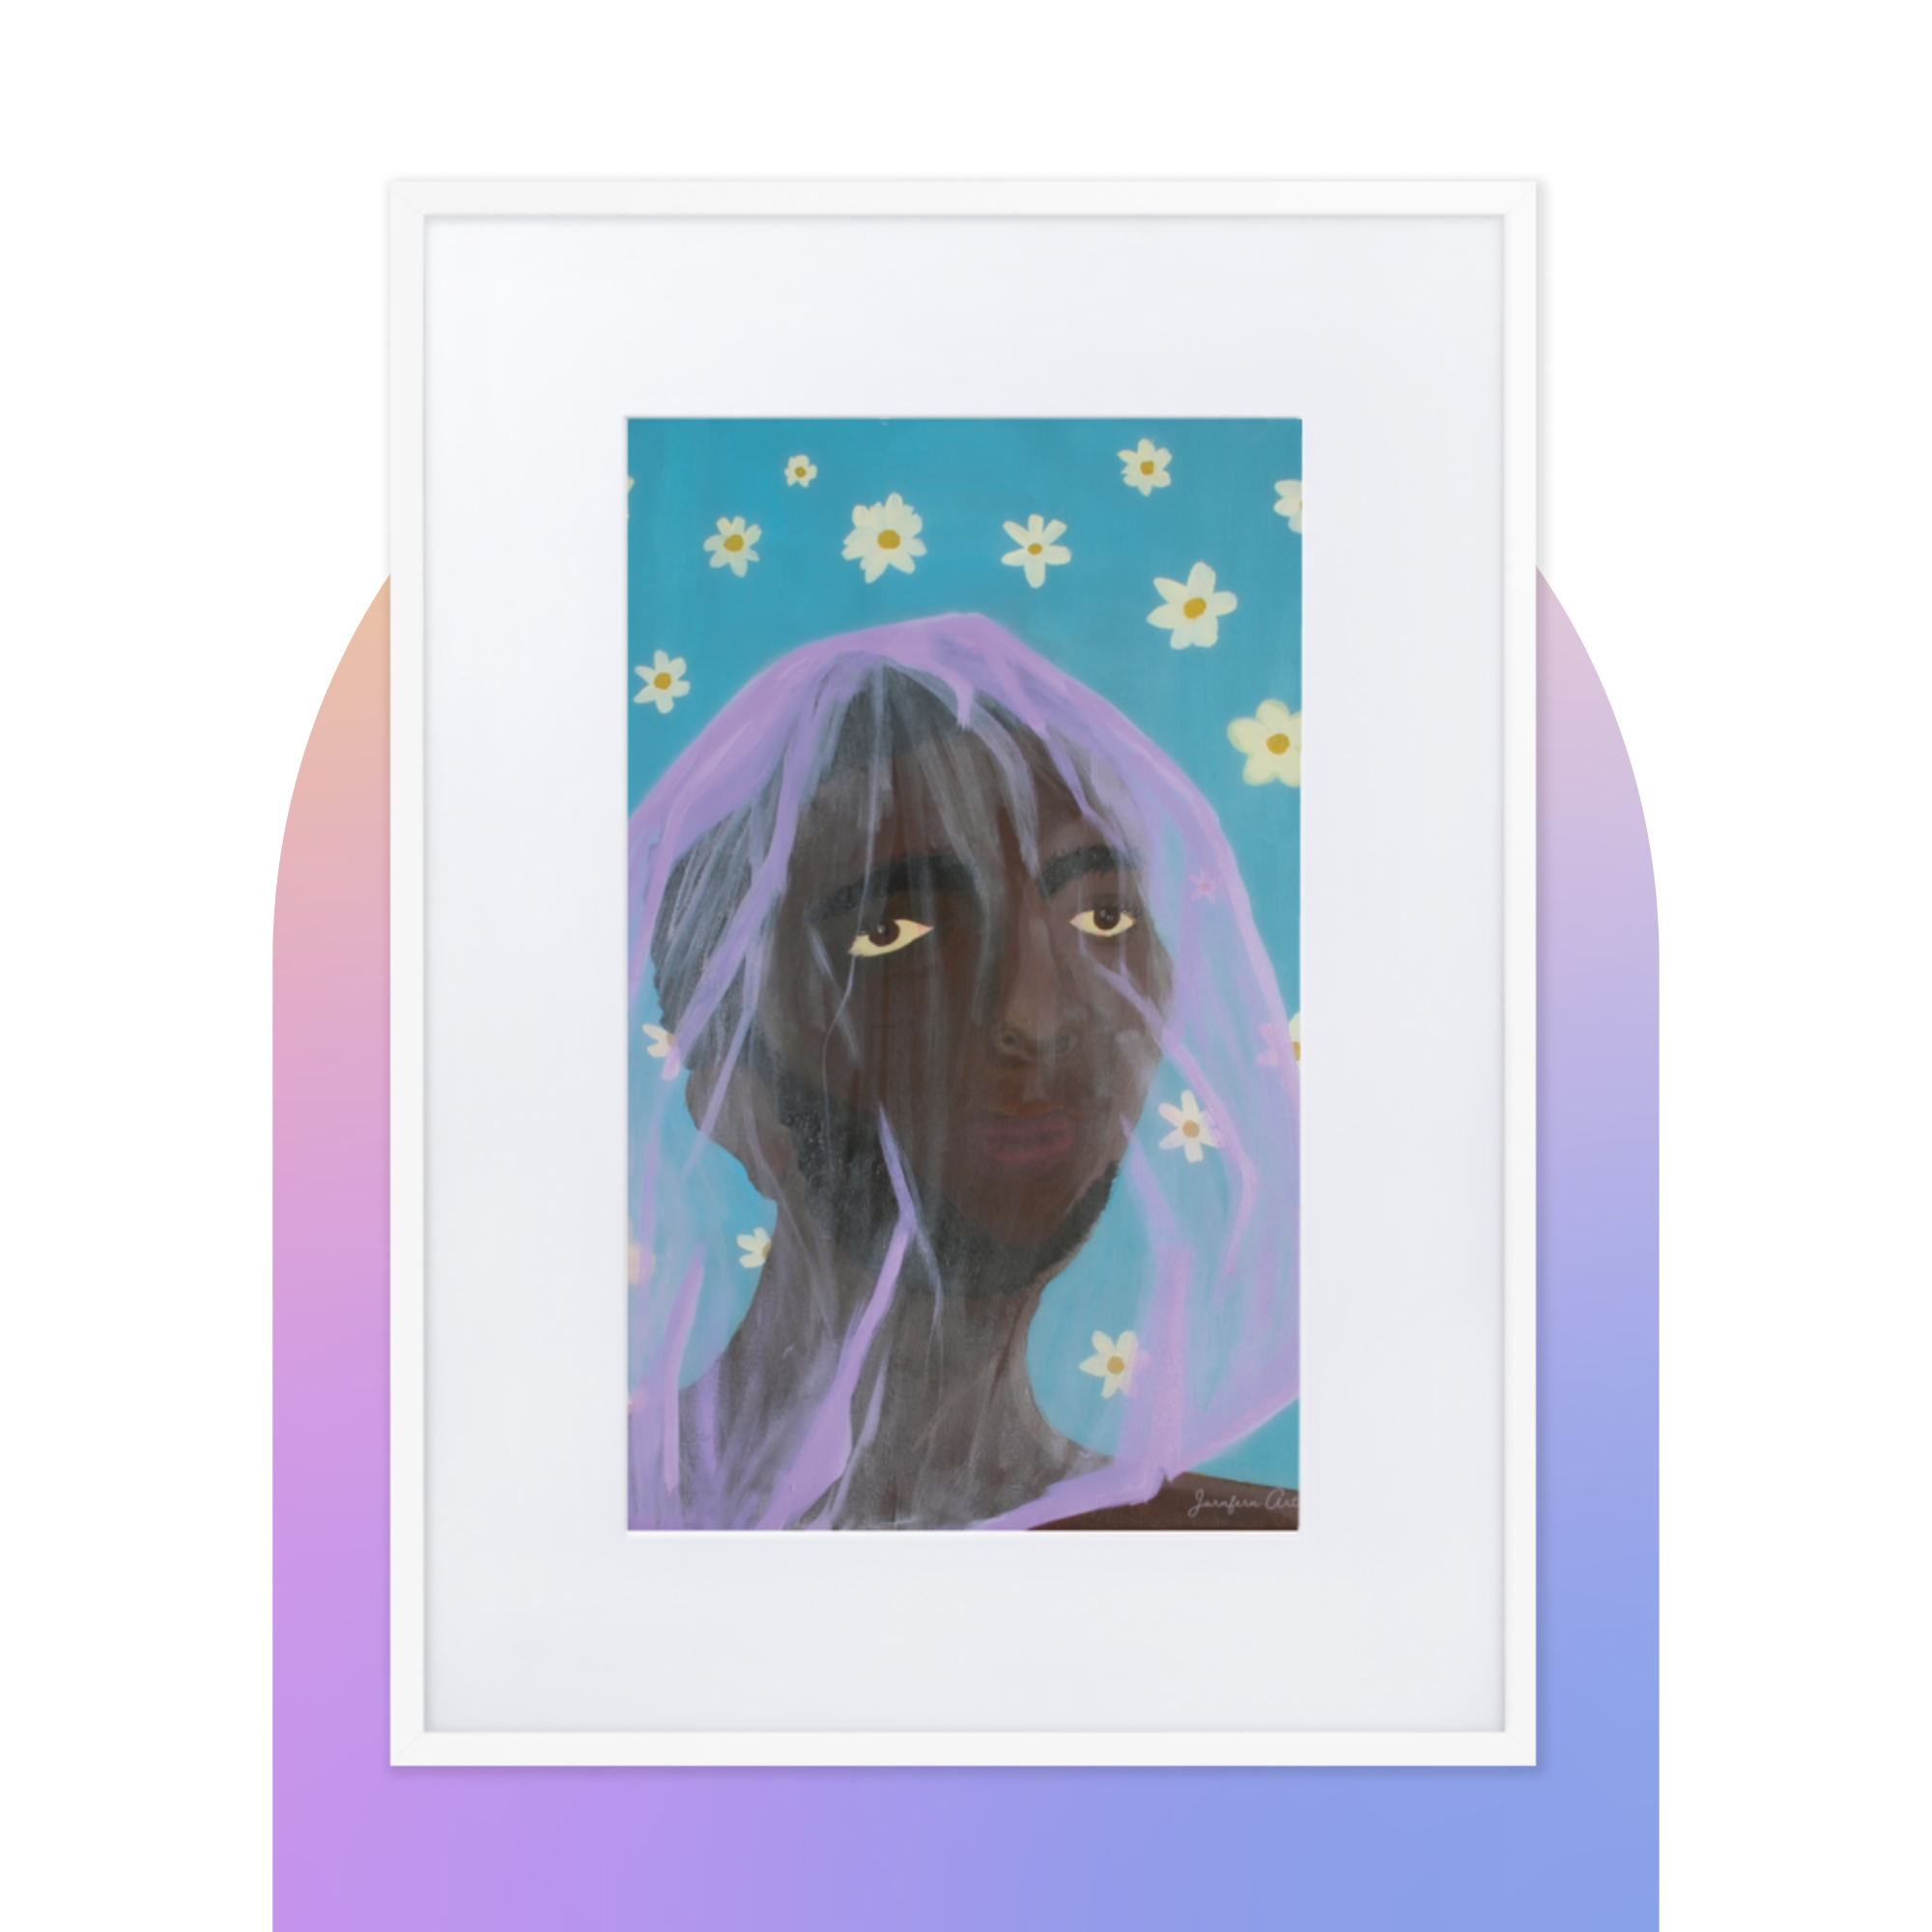 A painting of a man wearing a purple veil over his head with a blue background with white daisies, inside of a large white frame with a white mat boarder